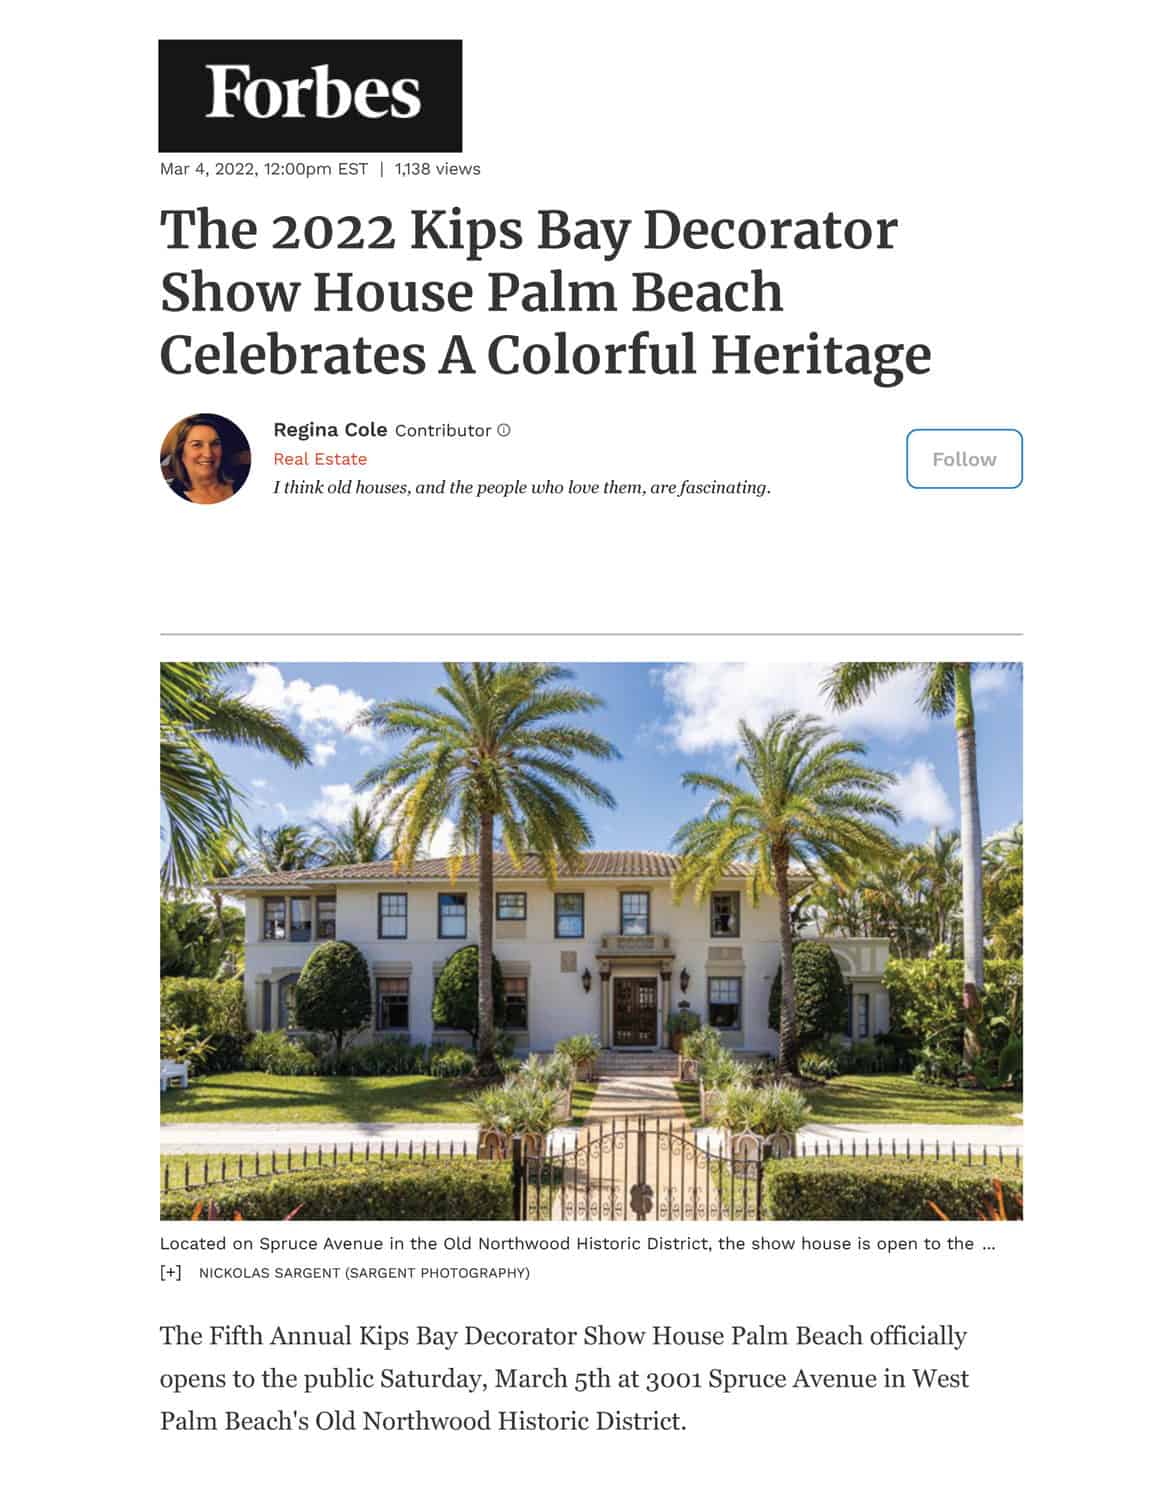 Forbes Online Article about 2022 Kips Bay Decorator Show House